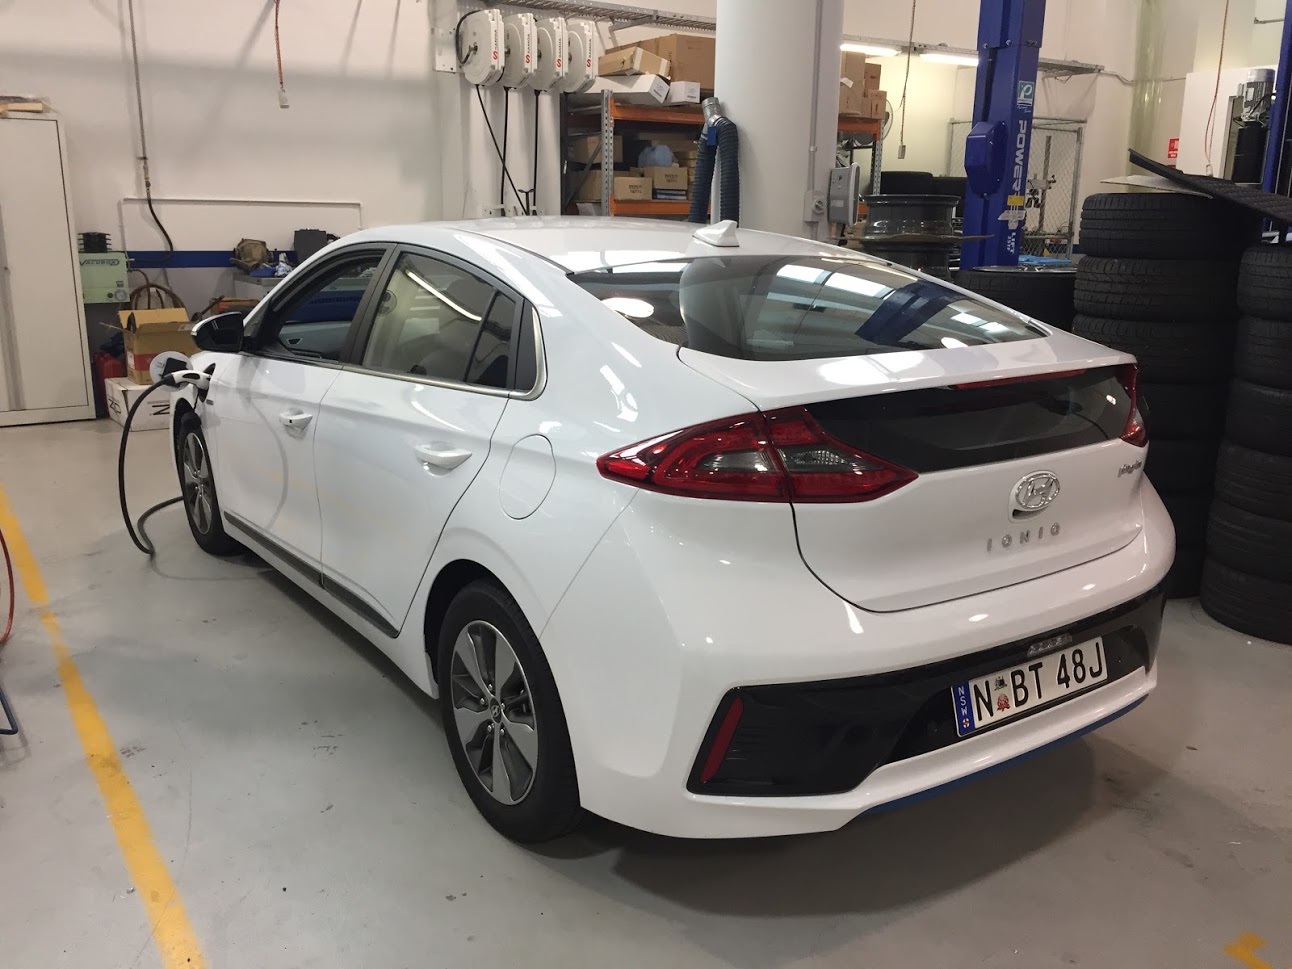 Range is everything with EVs, and the Ioniq’s streamlined profile keeps drag at a minimum